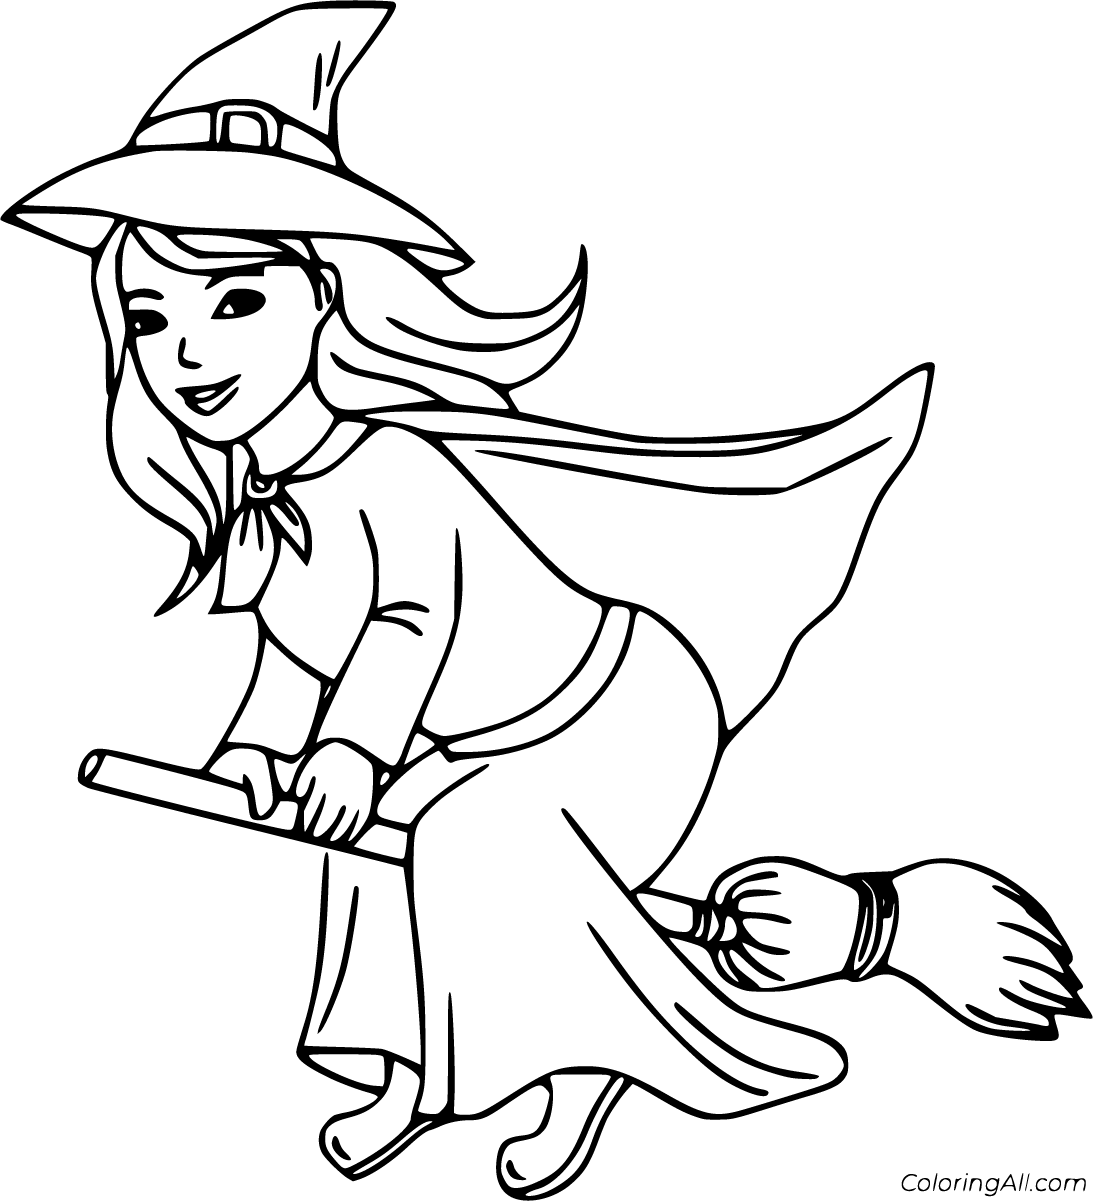 Witch Coloring Pages - ColoringAll